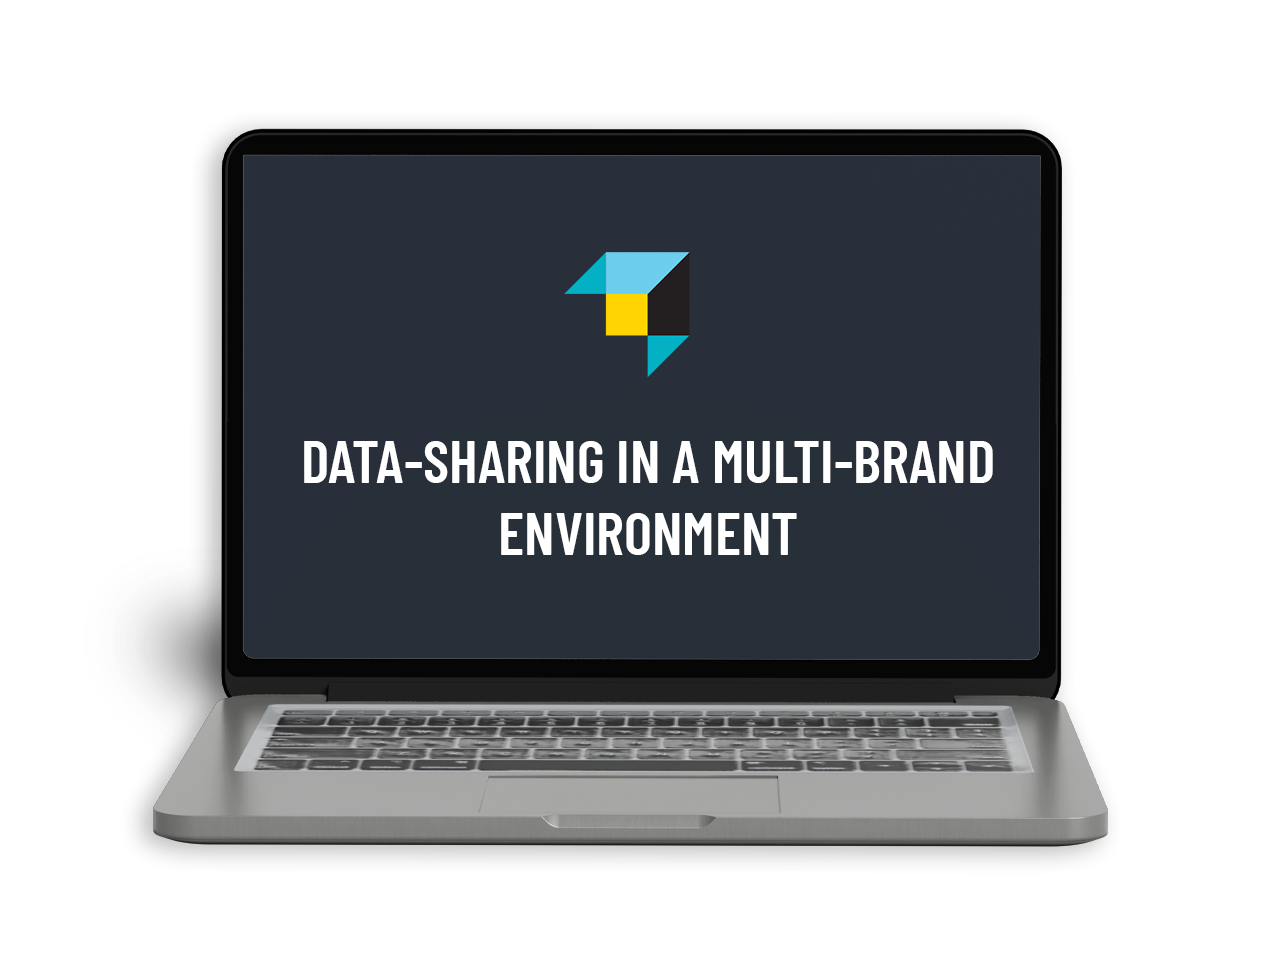 LAPTOP - Data-Sharing In A Multi-Brand Environment